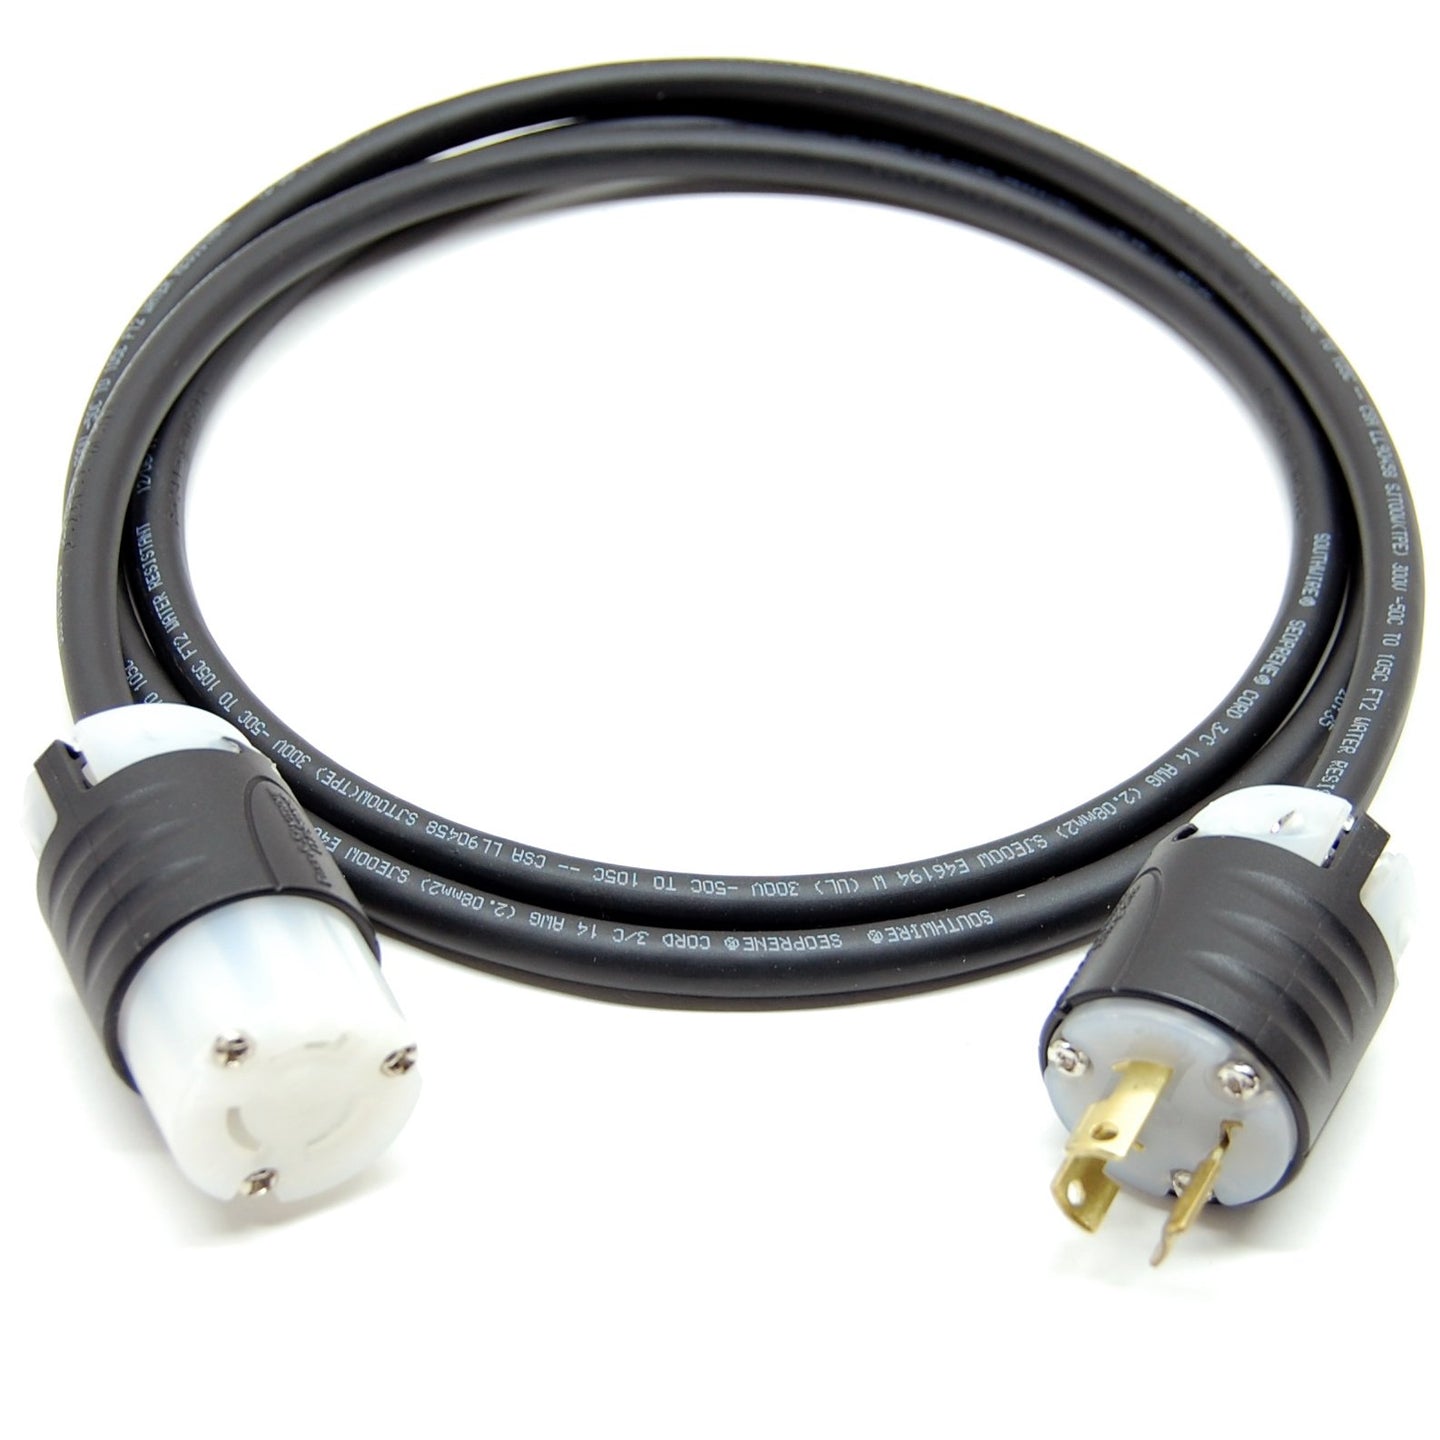 Nanolux Cord Connector with twist lock, 277v 6'